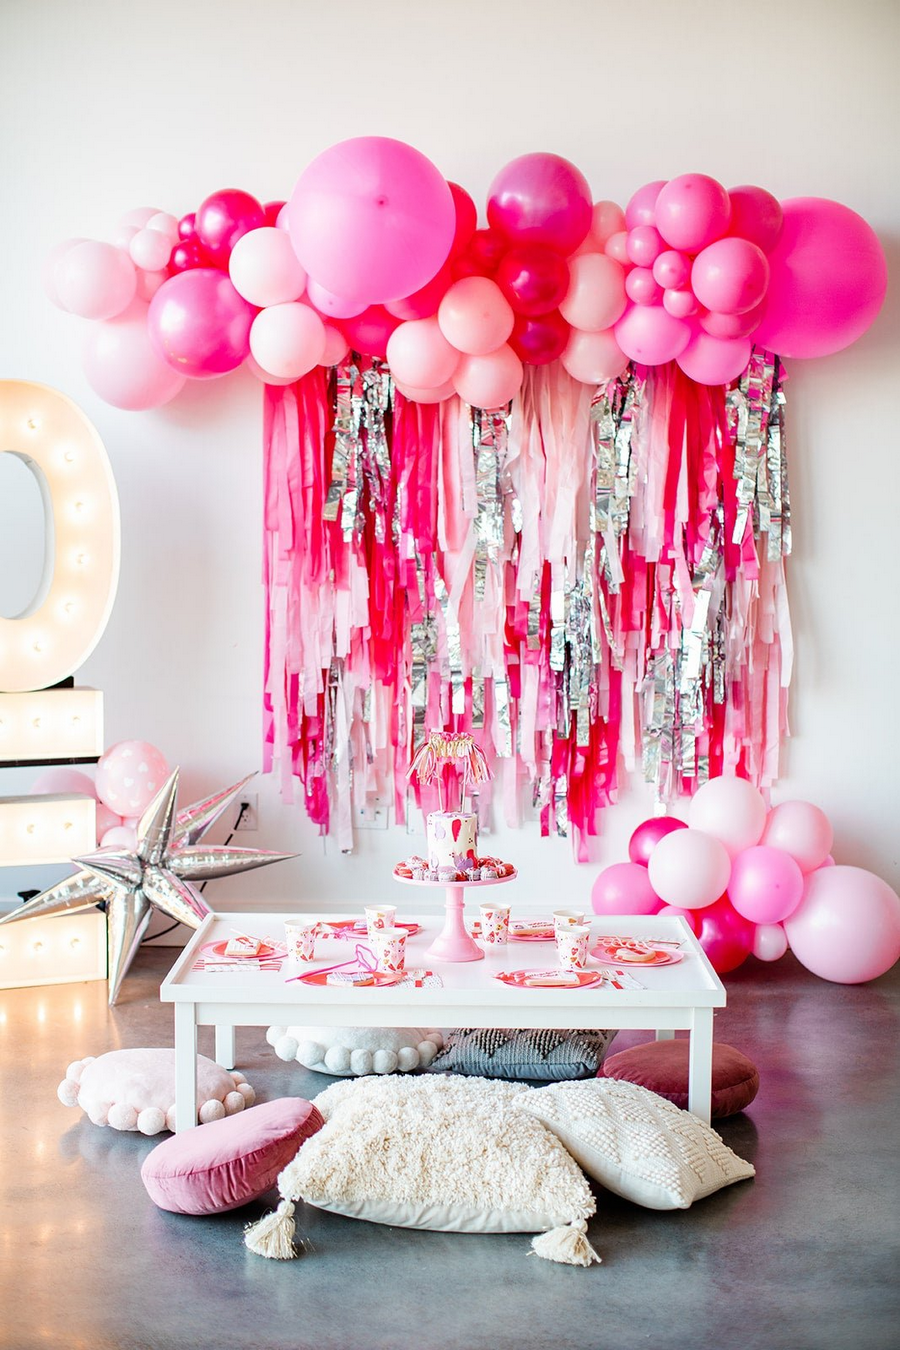 Backdrop with colorful balloons, cascading ribbons